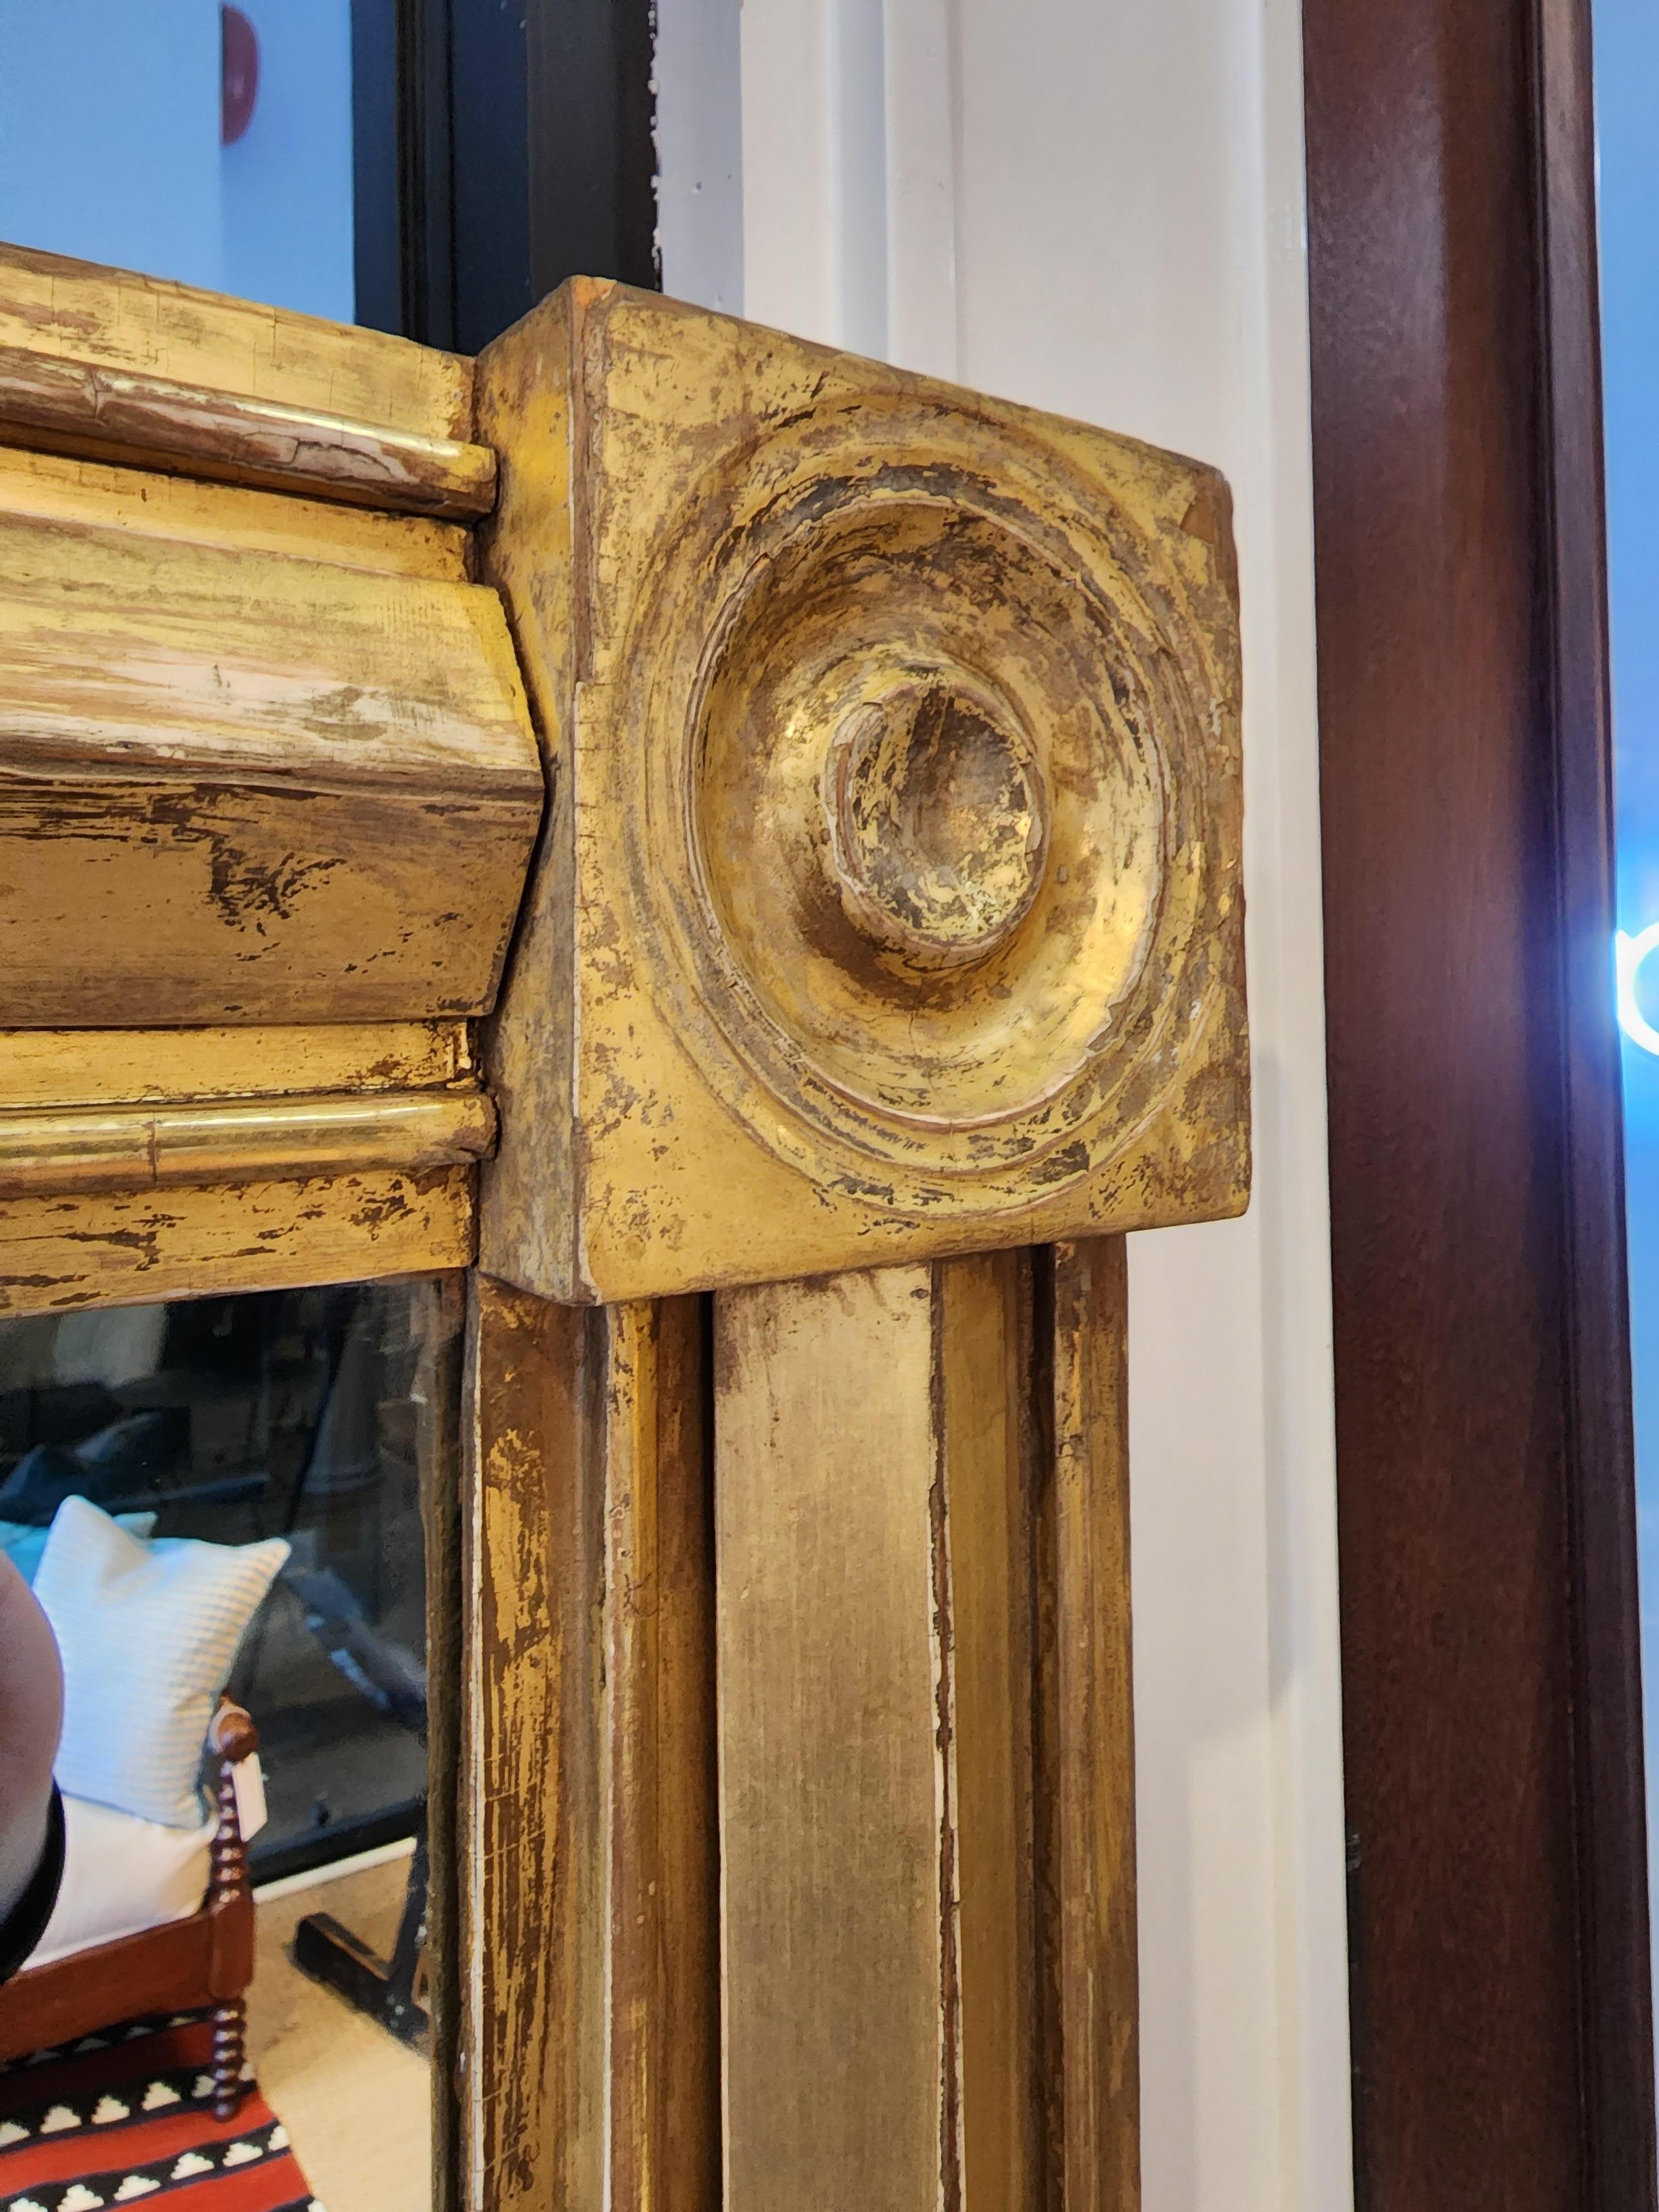 An American federal mirror of exceptional quality depth and design. With a perfect warm patina and retaining the original gold gilding and mirror glass. Stunning and bold this unusually shaped American classical mirror is perfect for any interior.